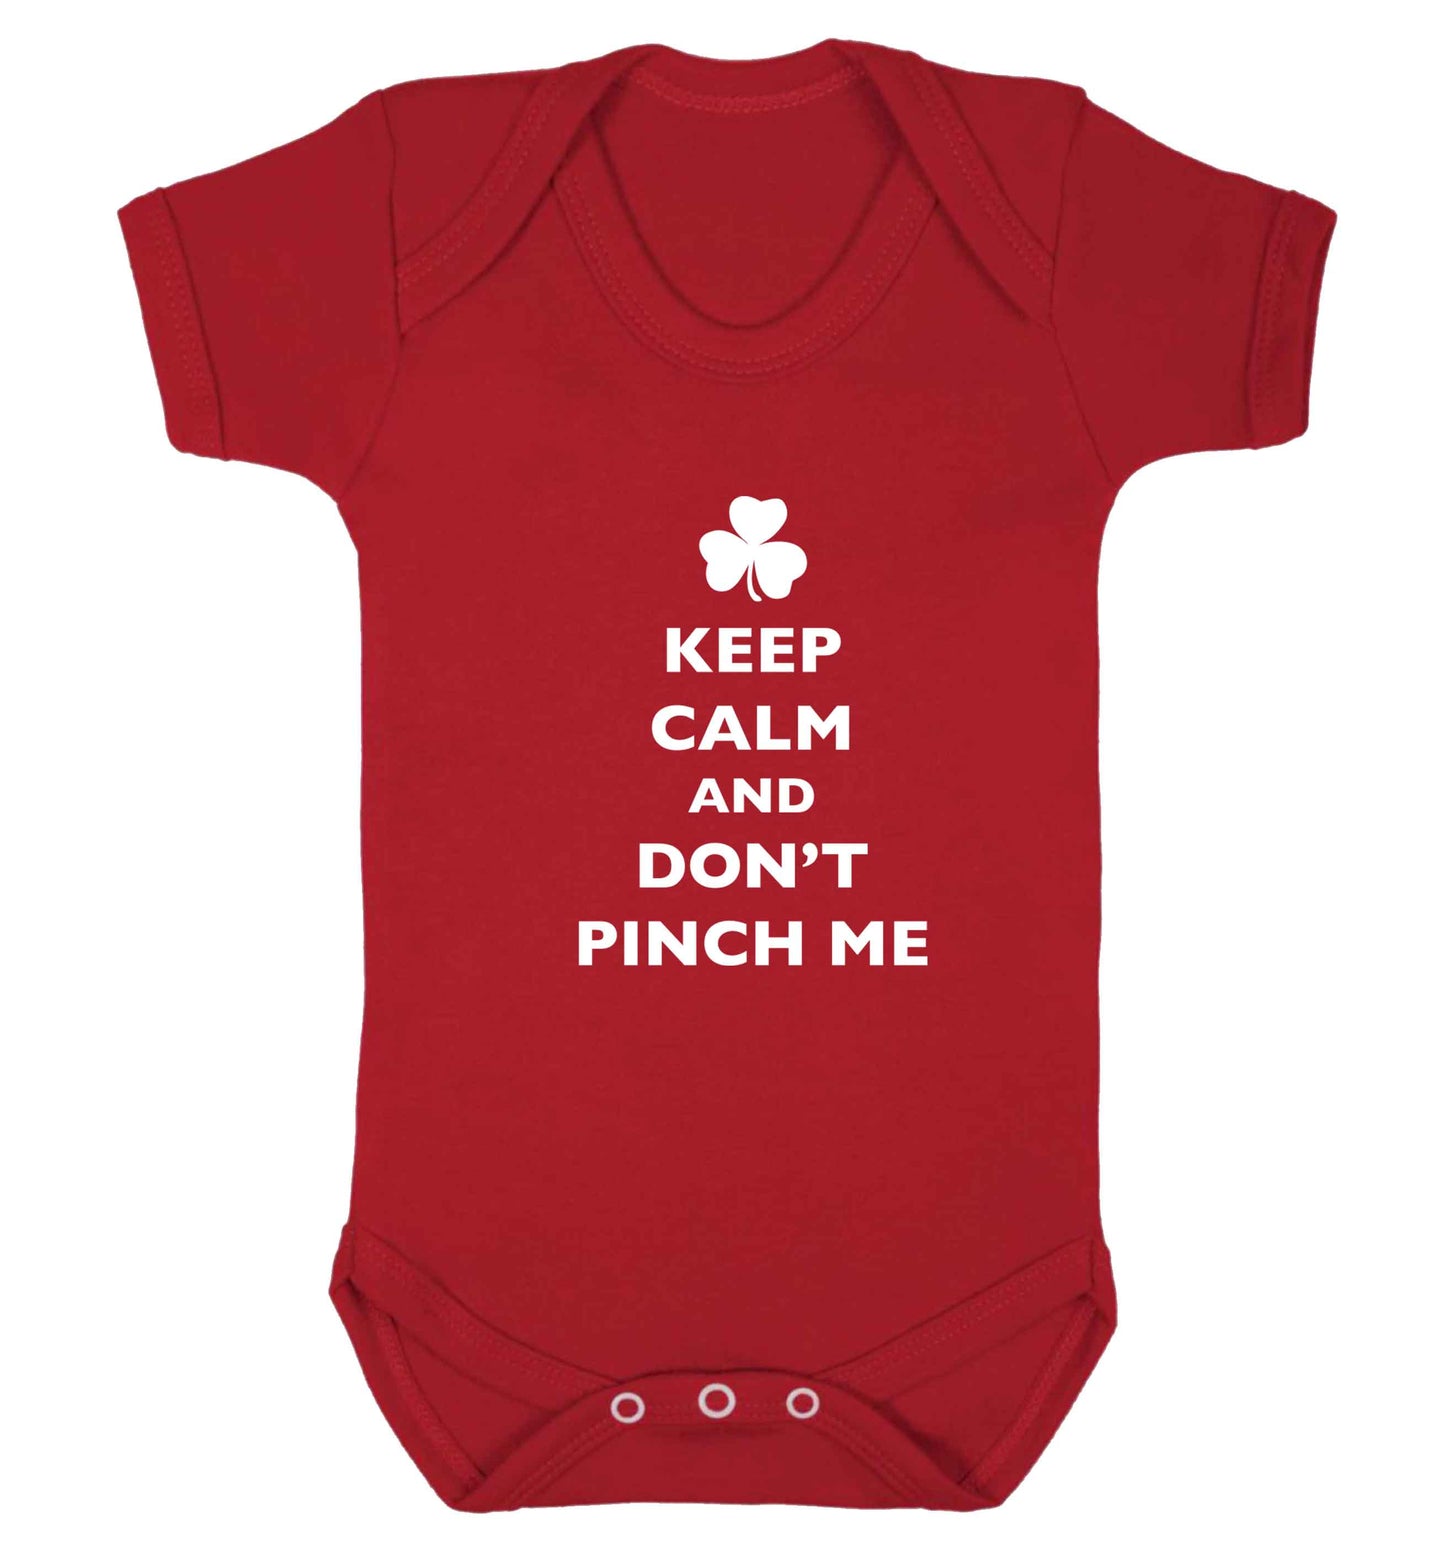 Keep calm and don't pinch me baby vest red 18-24 months